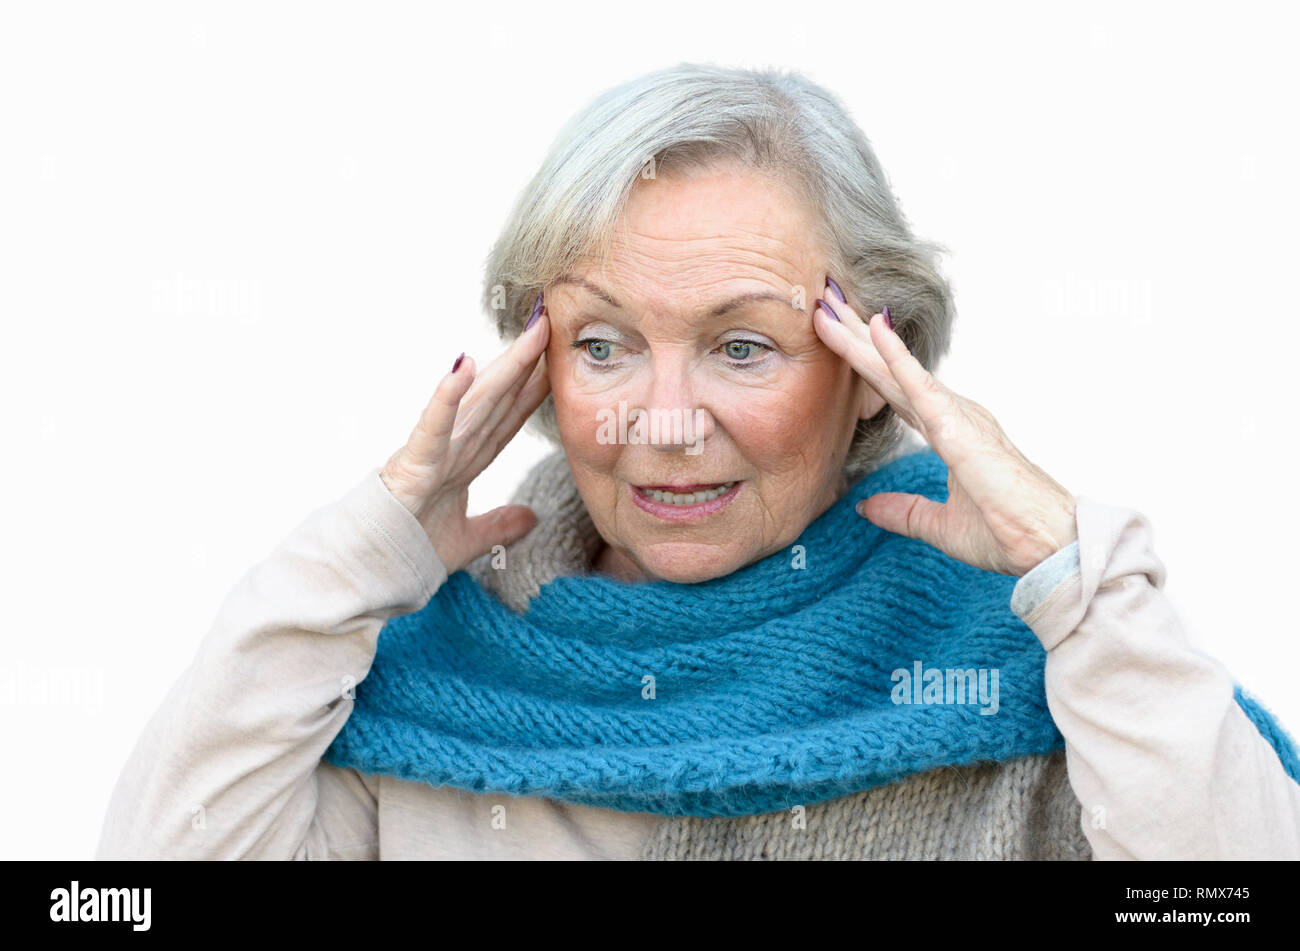 Confused and bewildered senior lady holding her hands to her temples as she looks aside, conceptual of the onset of dementia or Alzheimers disease Stock Photo